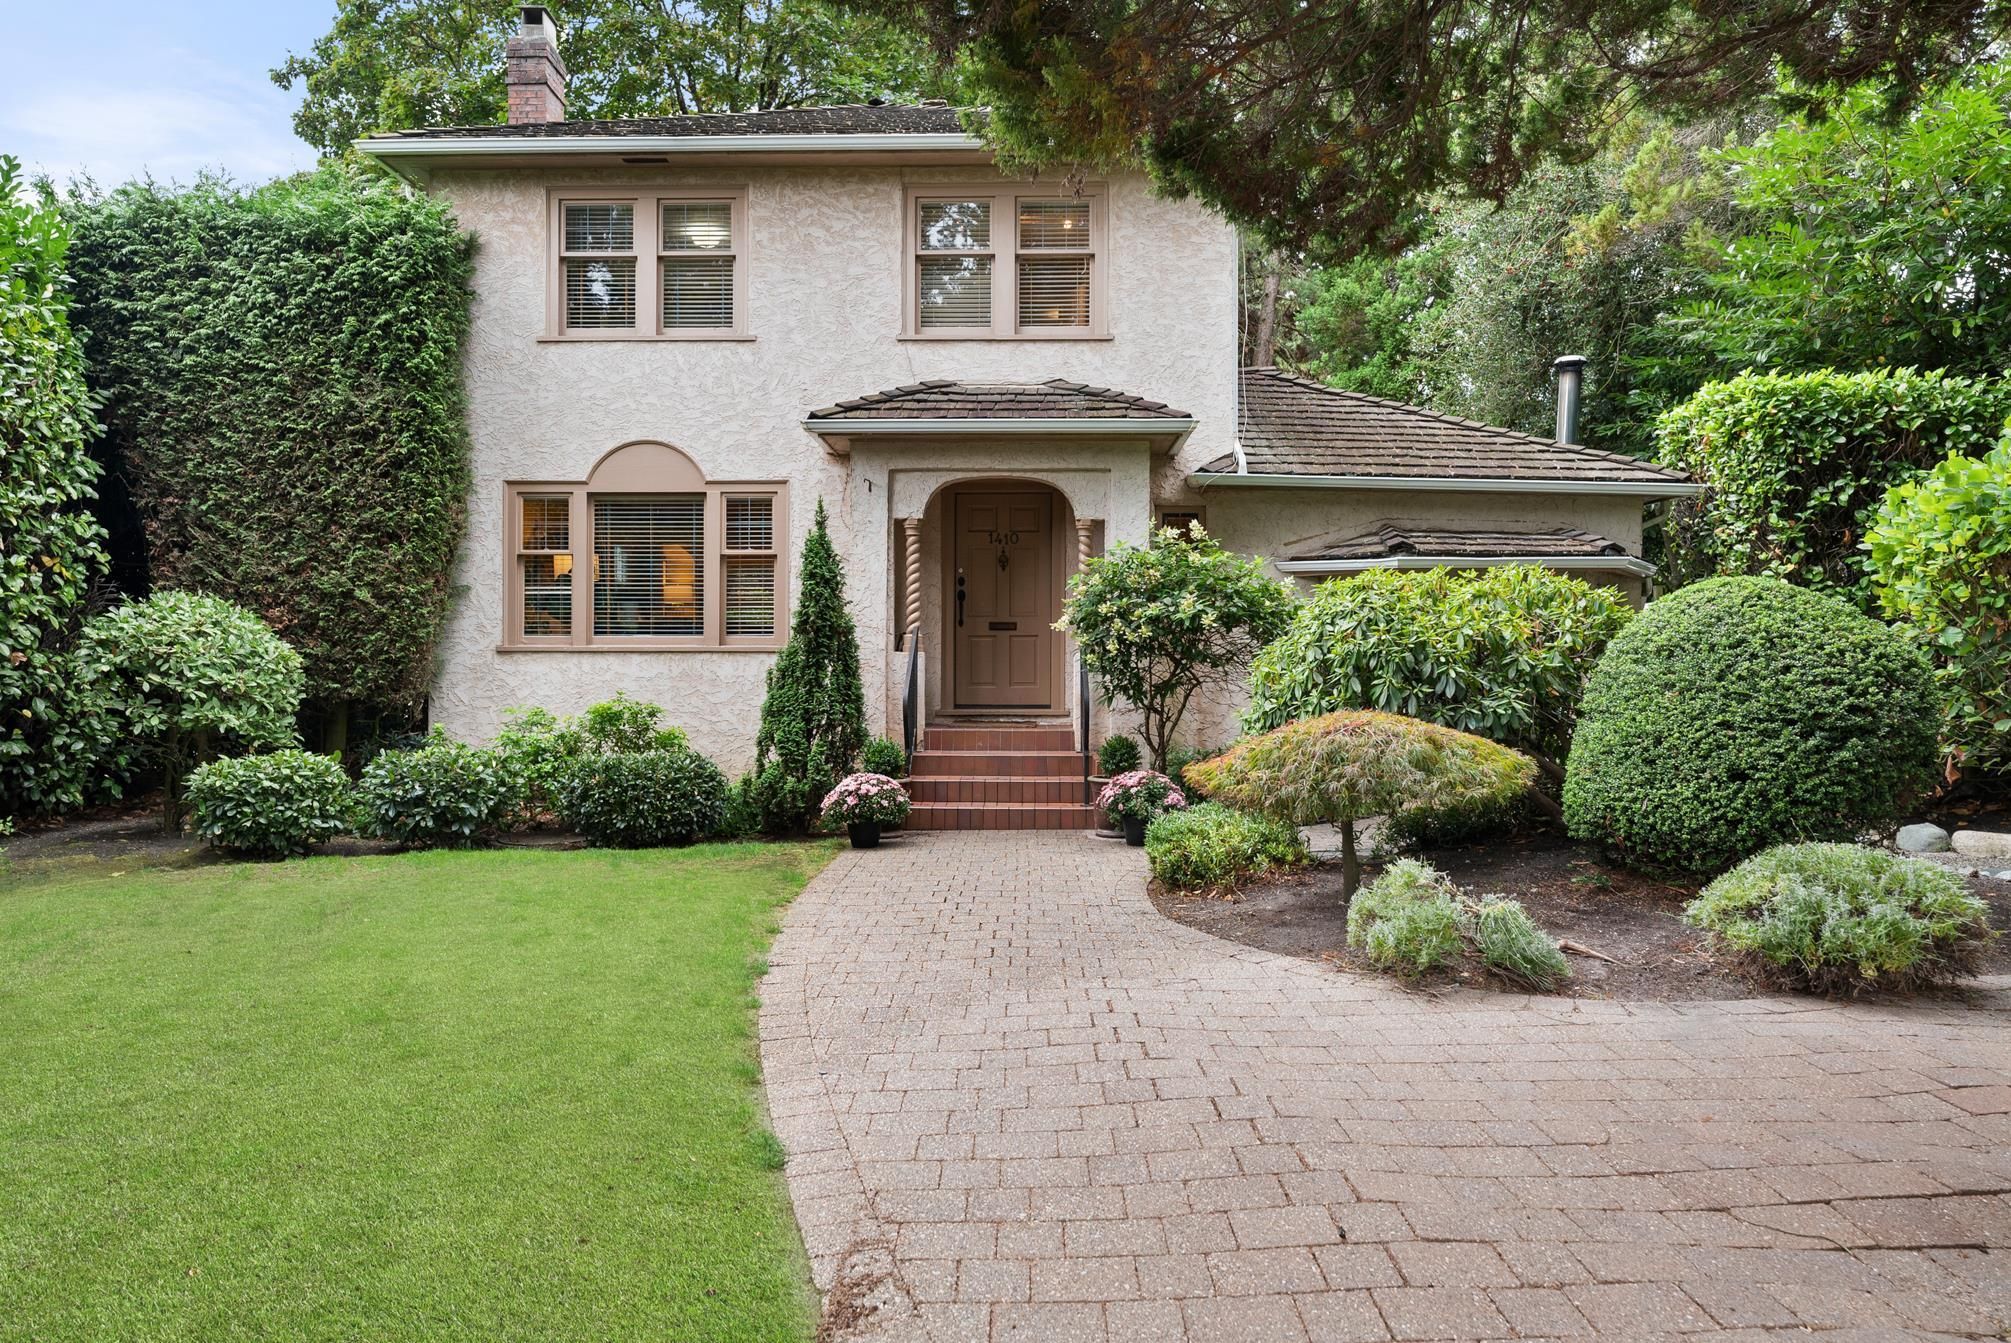 New property listed in Shaughnessy, Vancouver West